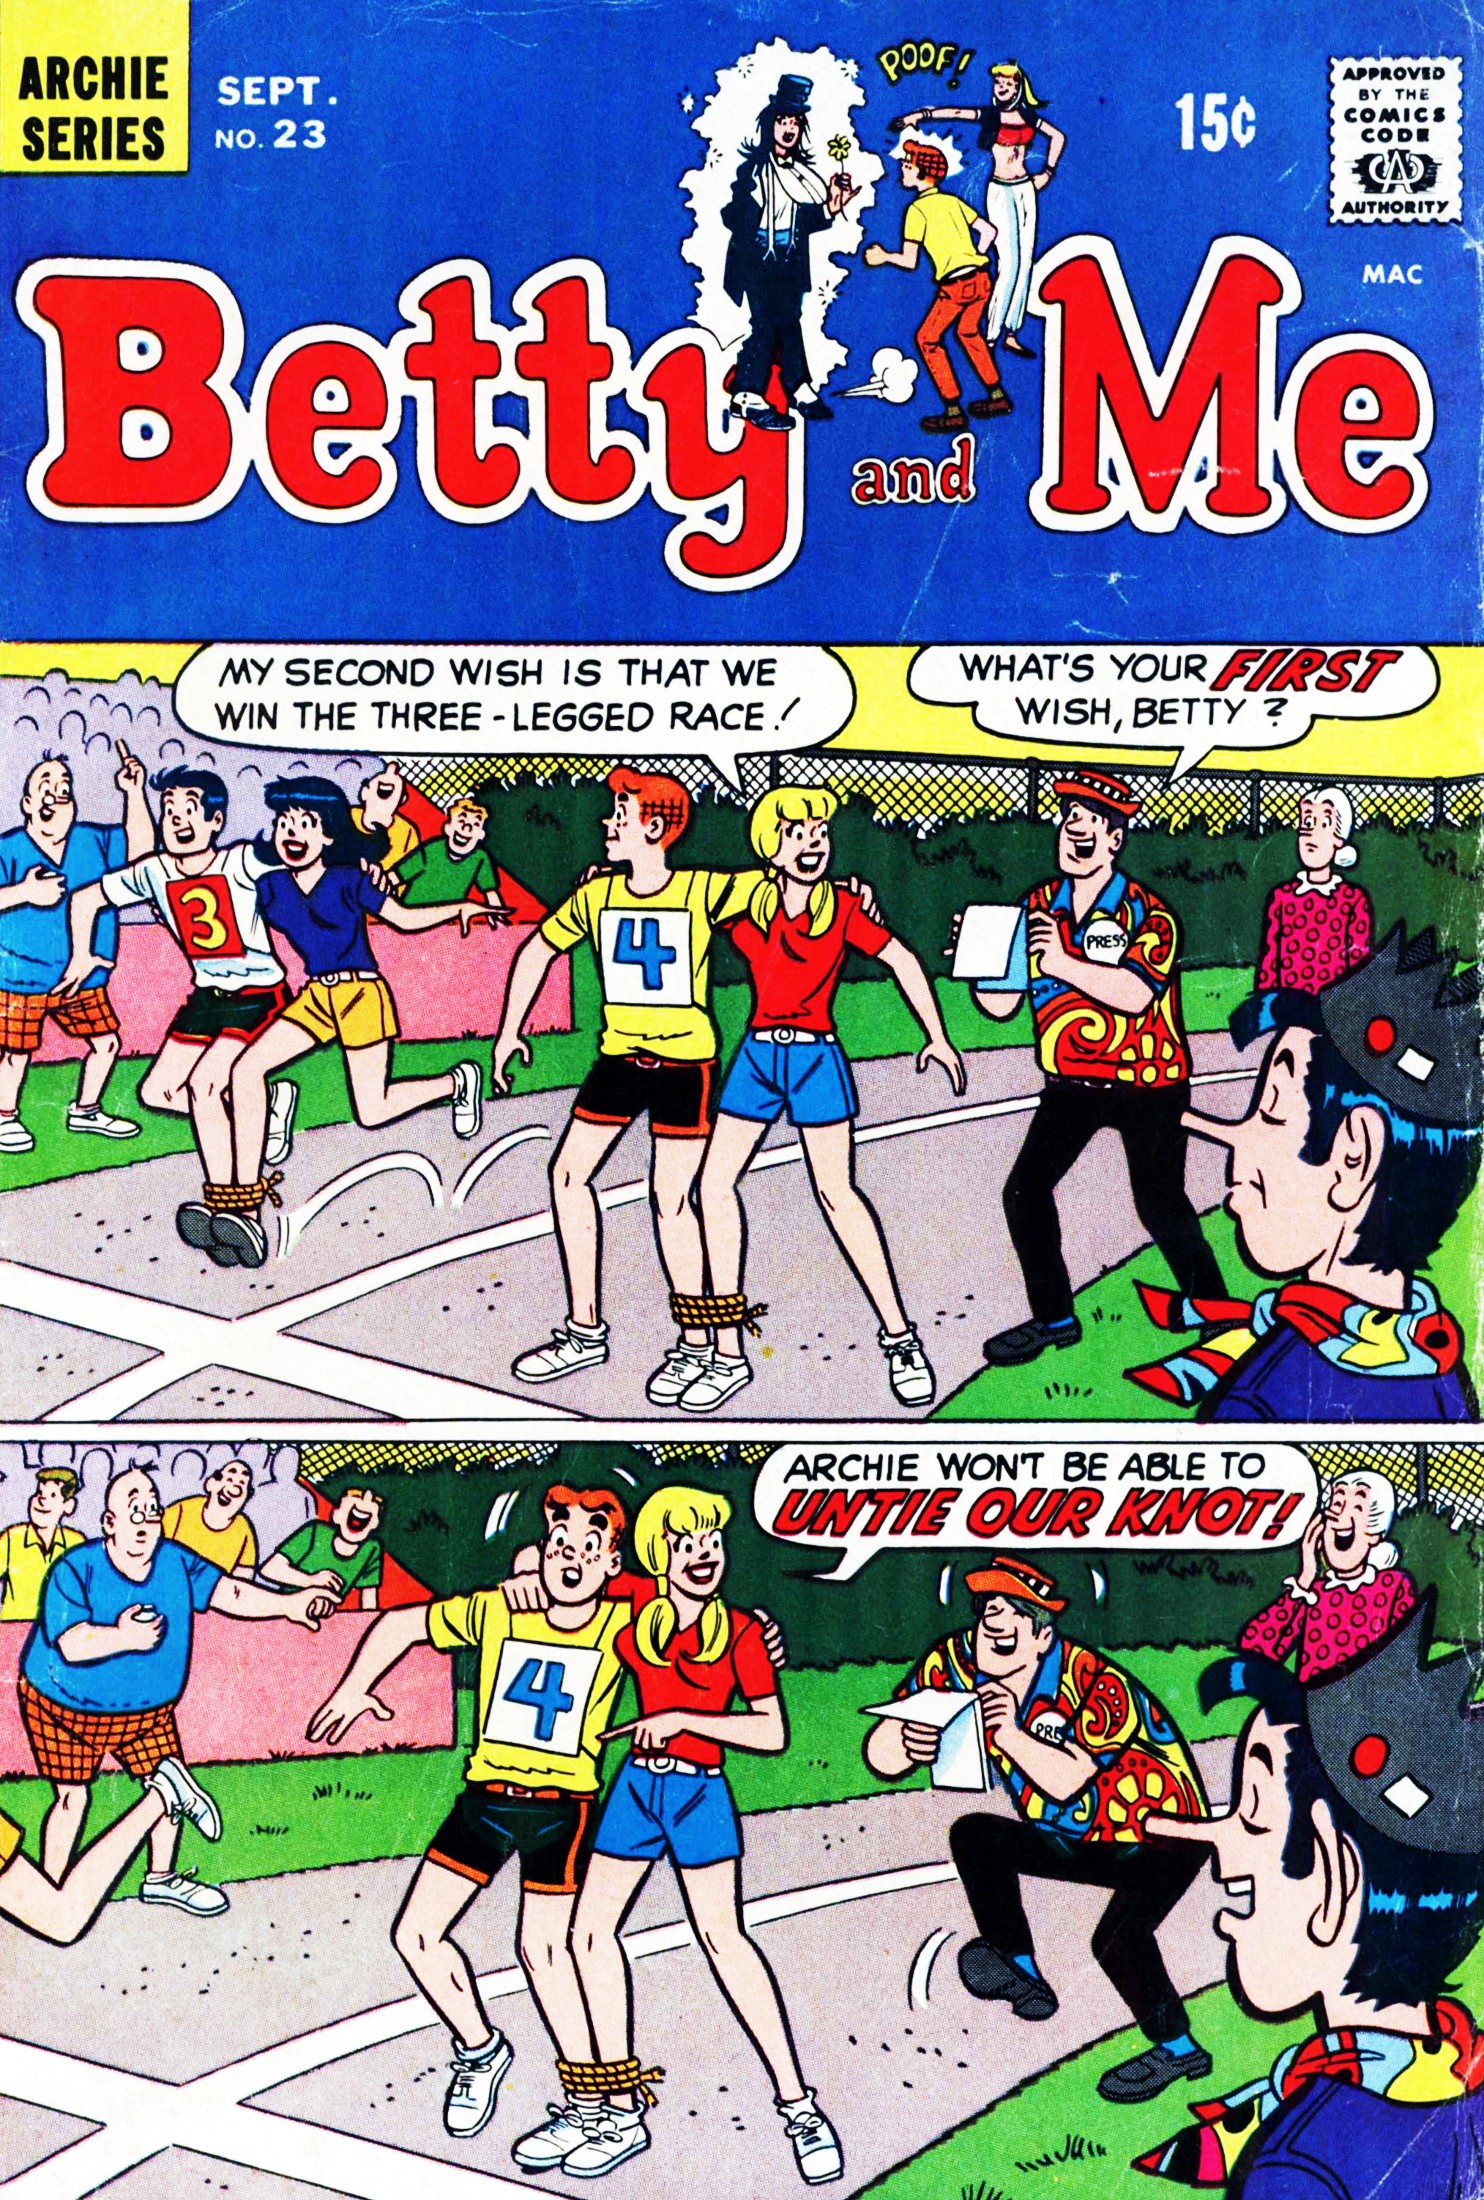 Read online Betty and Me comic -  Issue #23 - 1